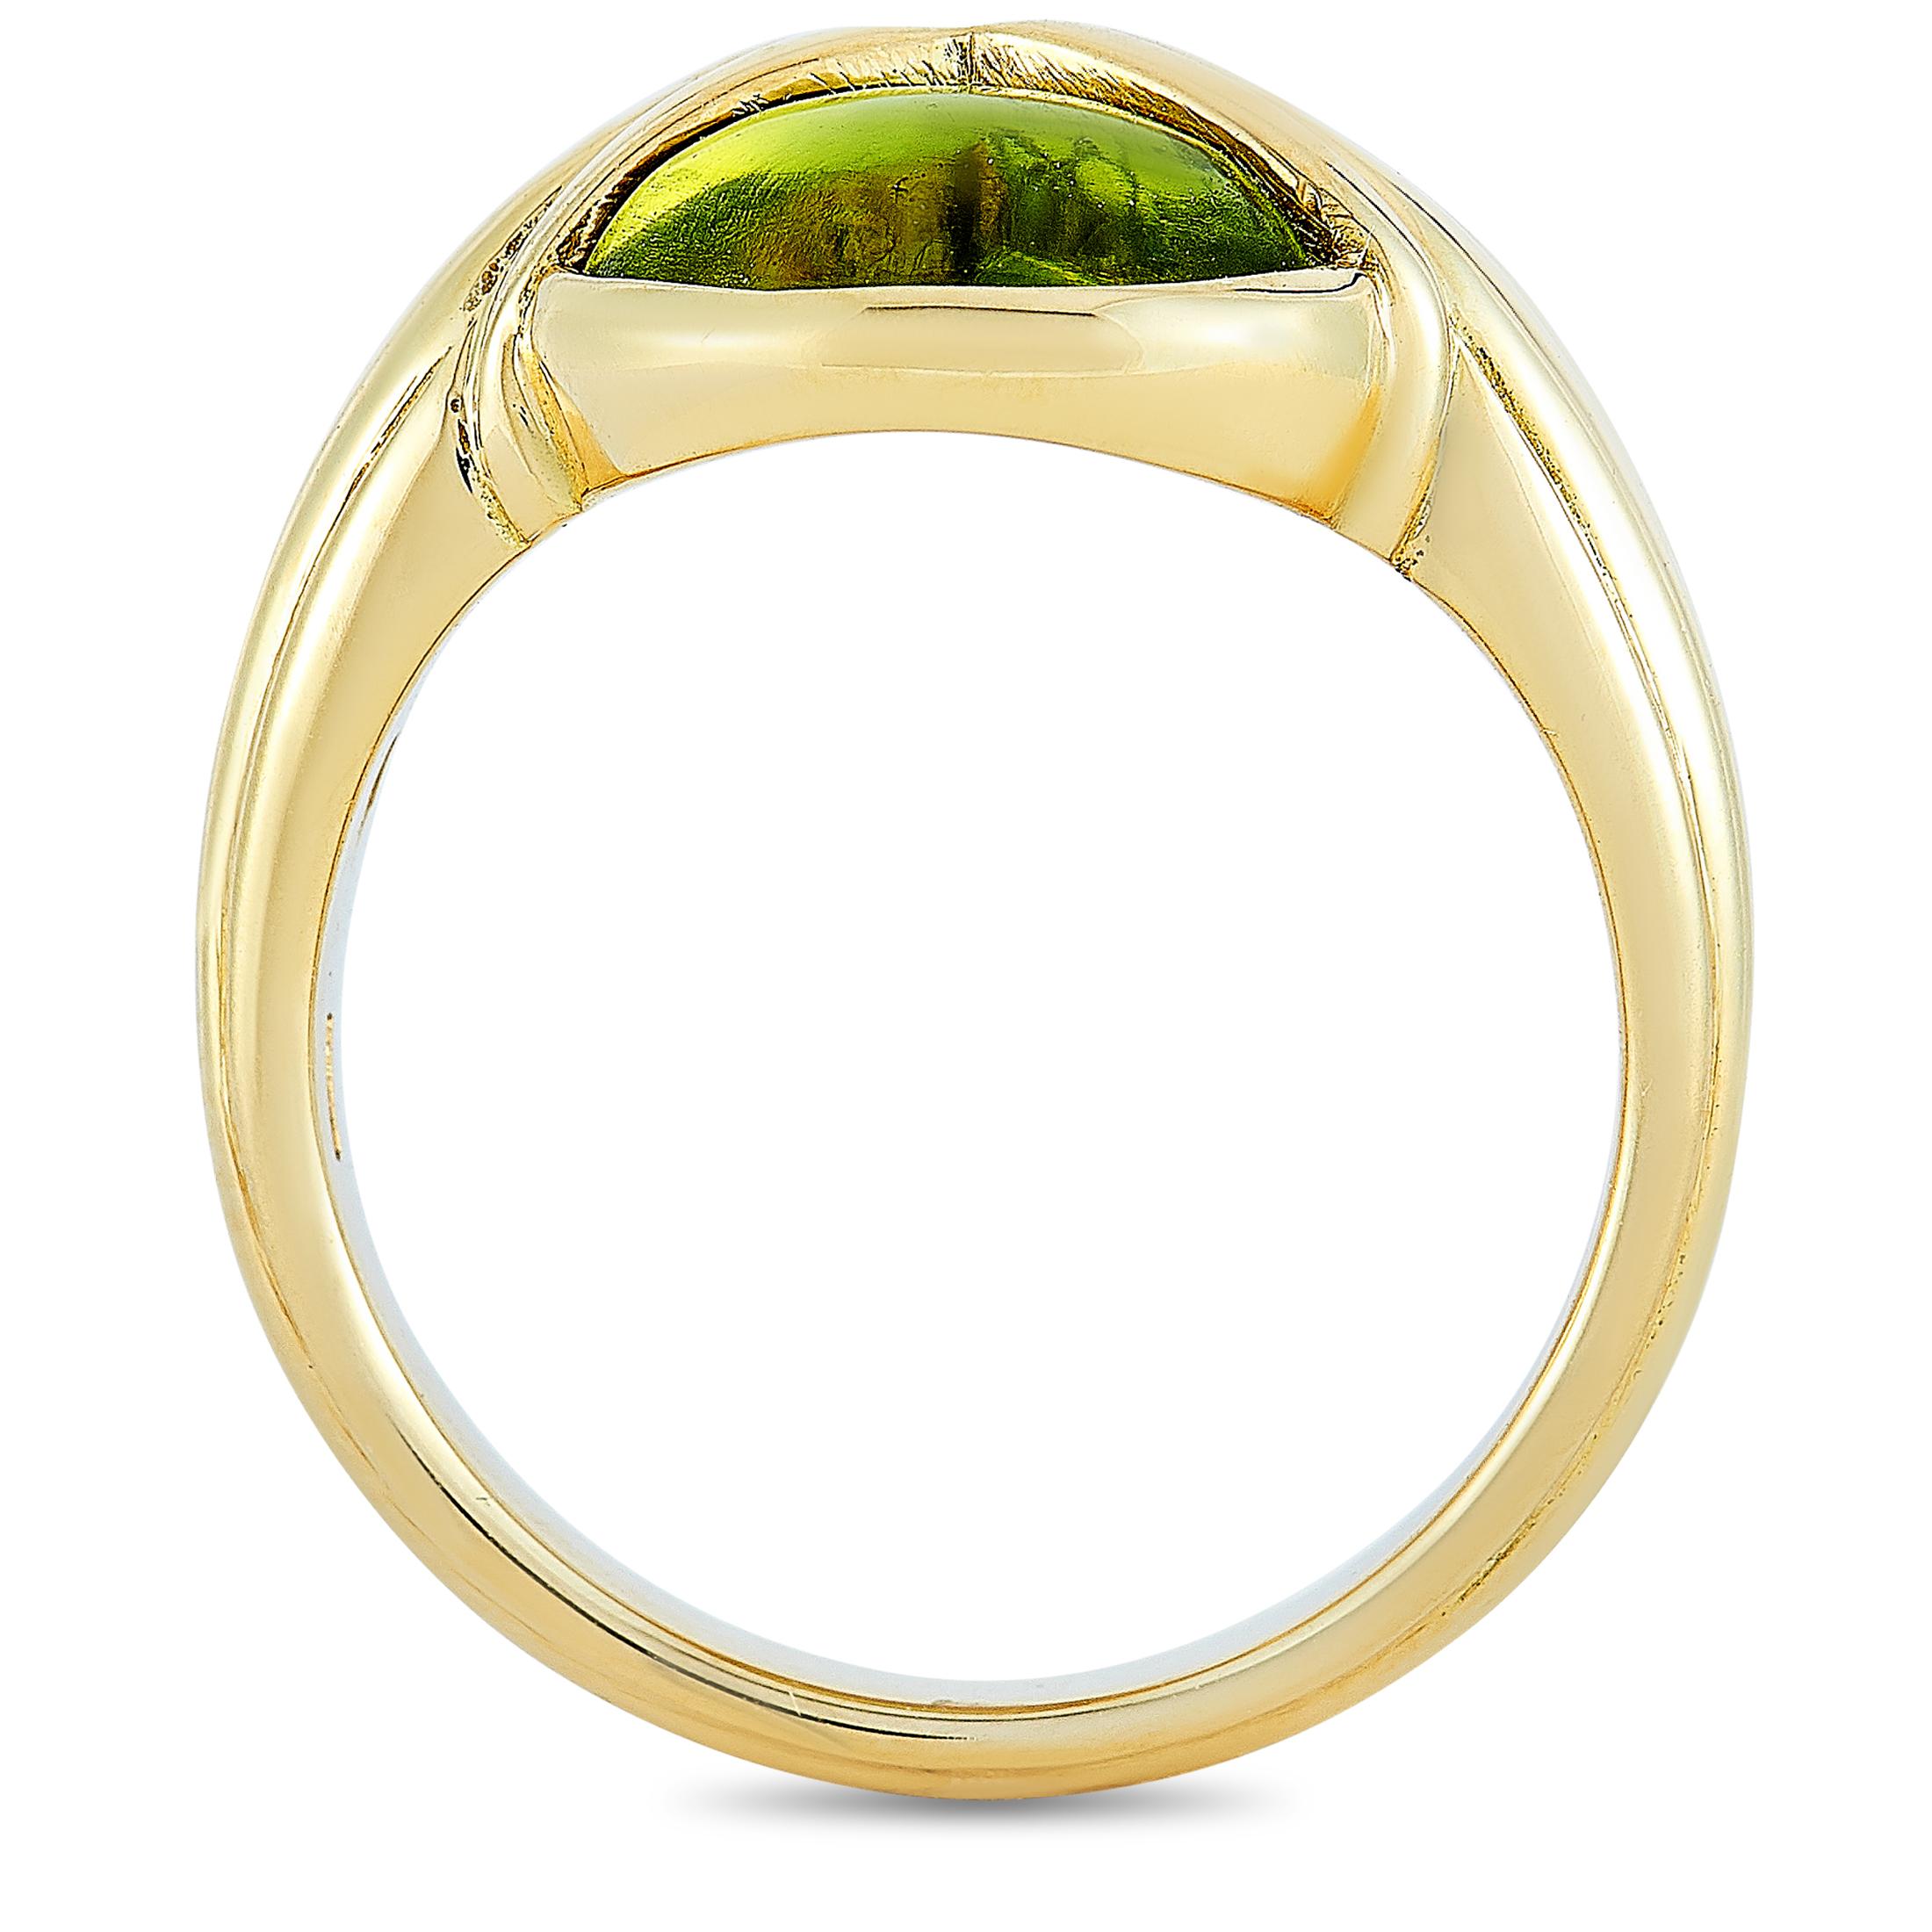 This Bvlgari ring is crafted from 18K yellow gold and embellished with a peridot and a tourmaline. The ring weighs 8.3 grams and boasts band thickness of 3 mm and top height of 6 mm, while top dimensions measure 12 by 12 mm.

Offered in estate